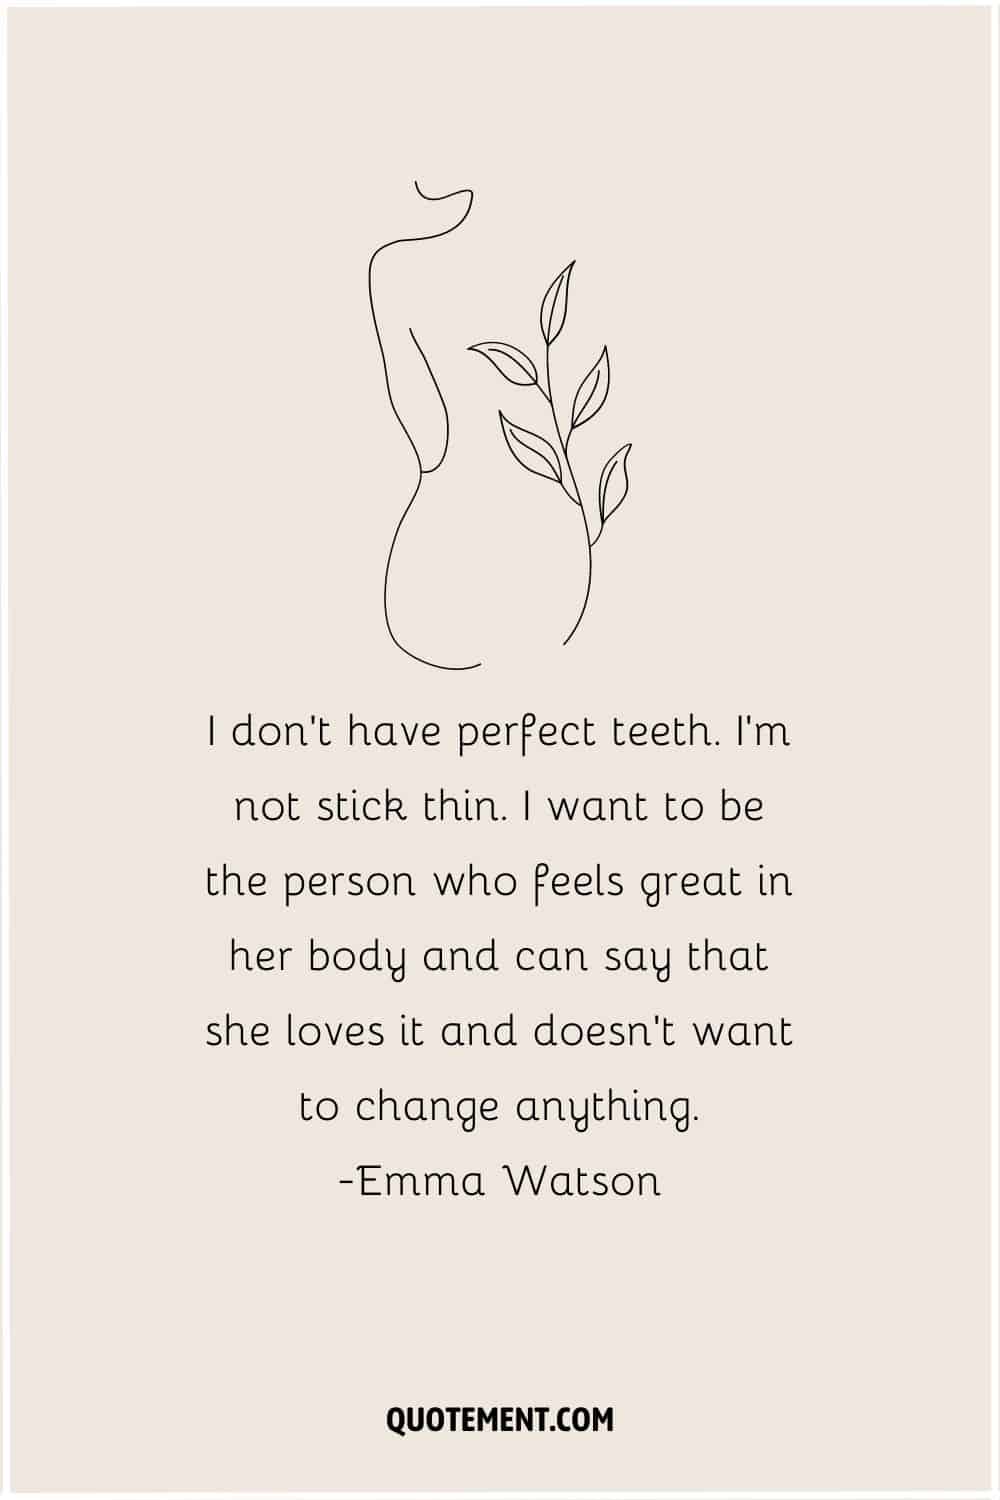 Quote about body image and illustration of a woman.
